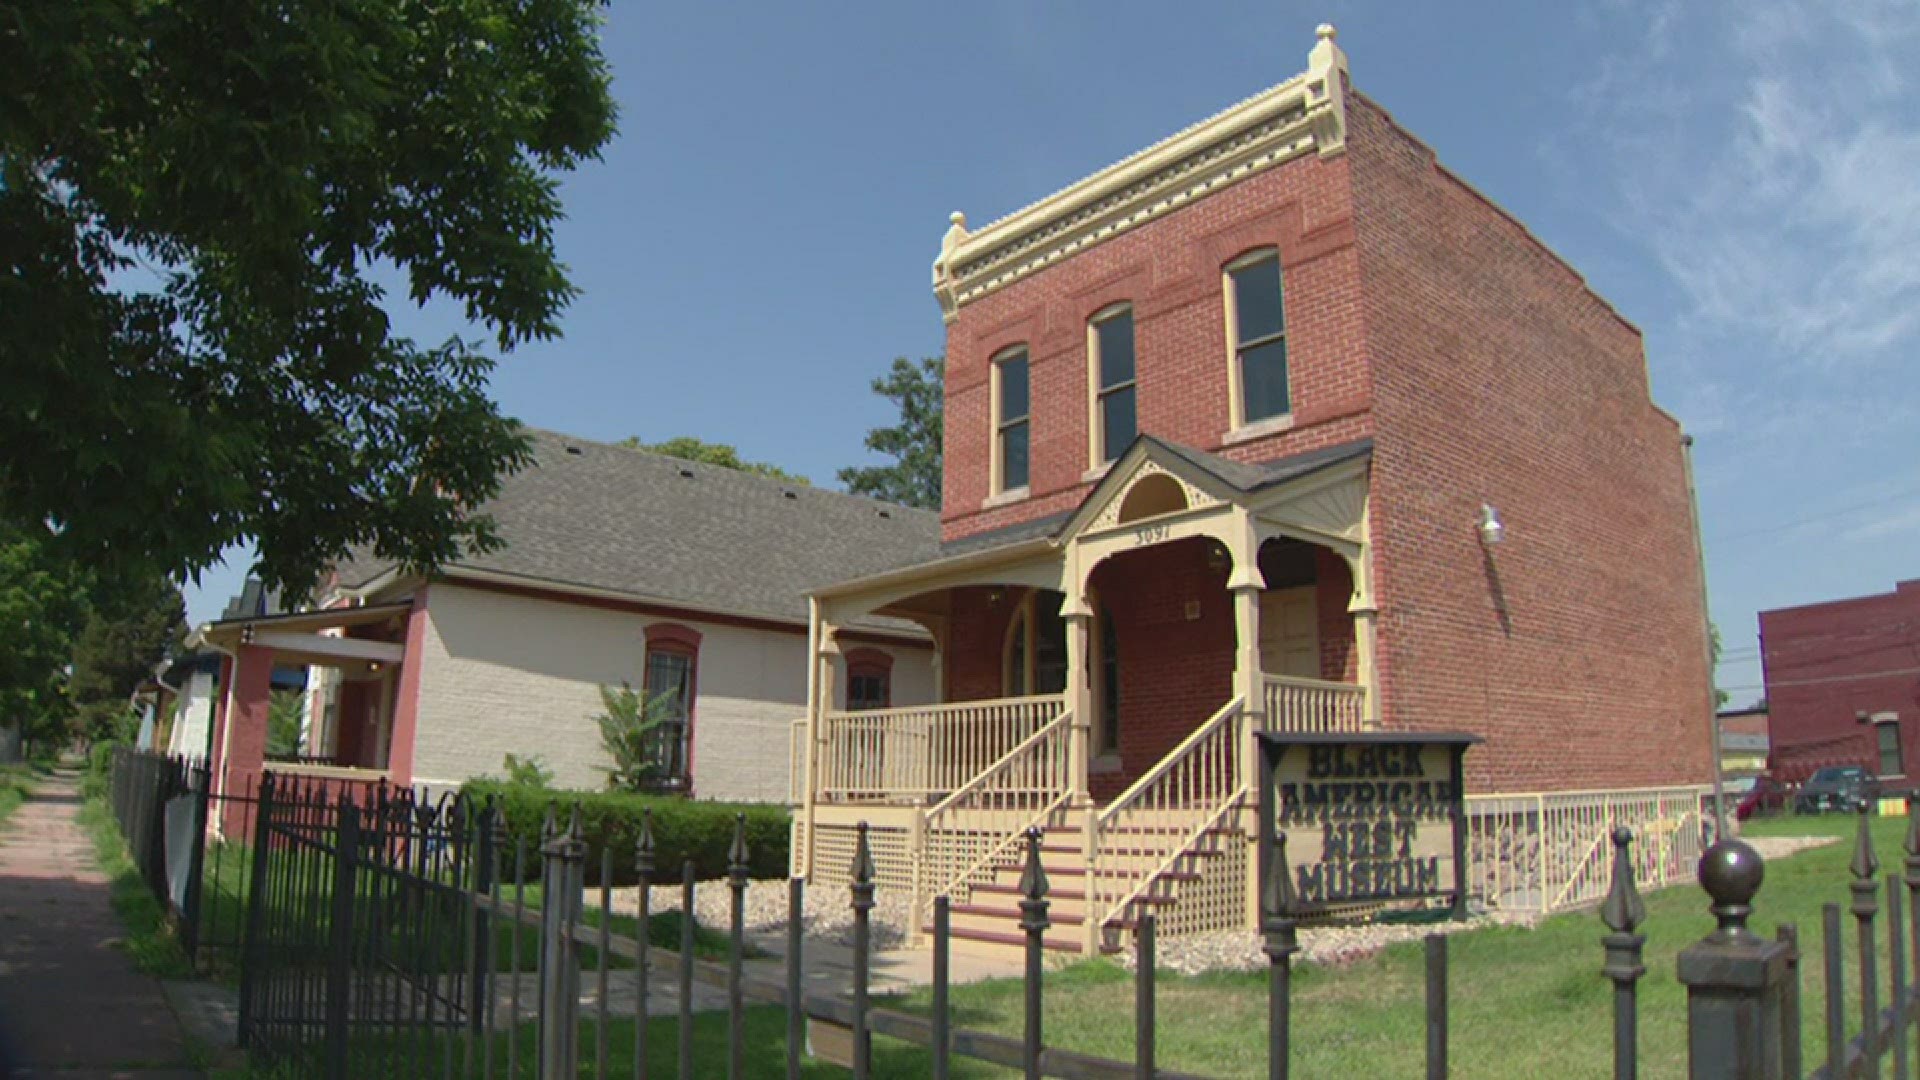 The African-American Cultural Heritage Action fund recently awarded $3 million in grants to 40 sites - two in Denver - to help preserve Black history.